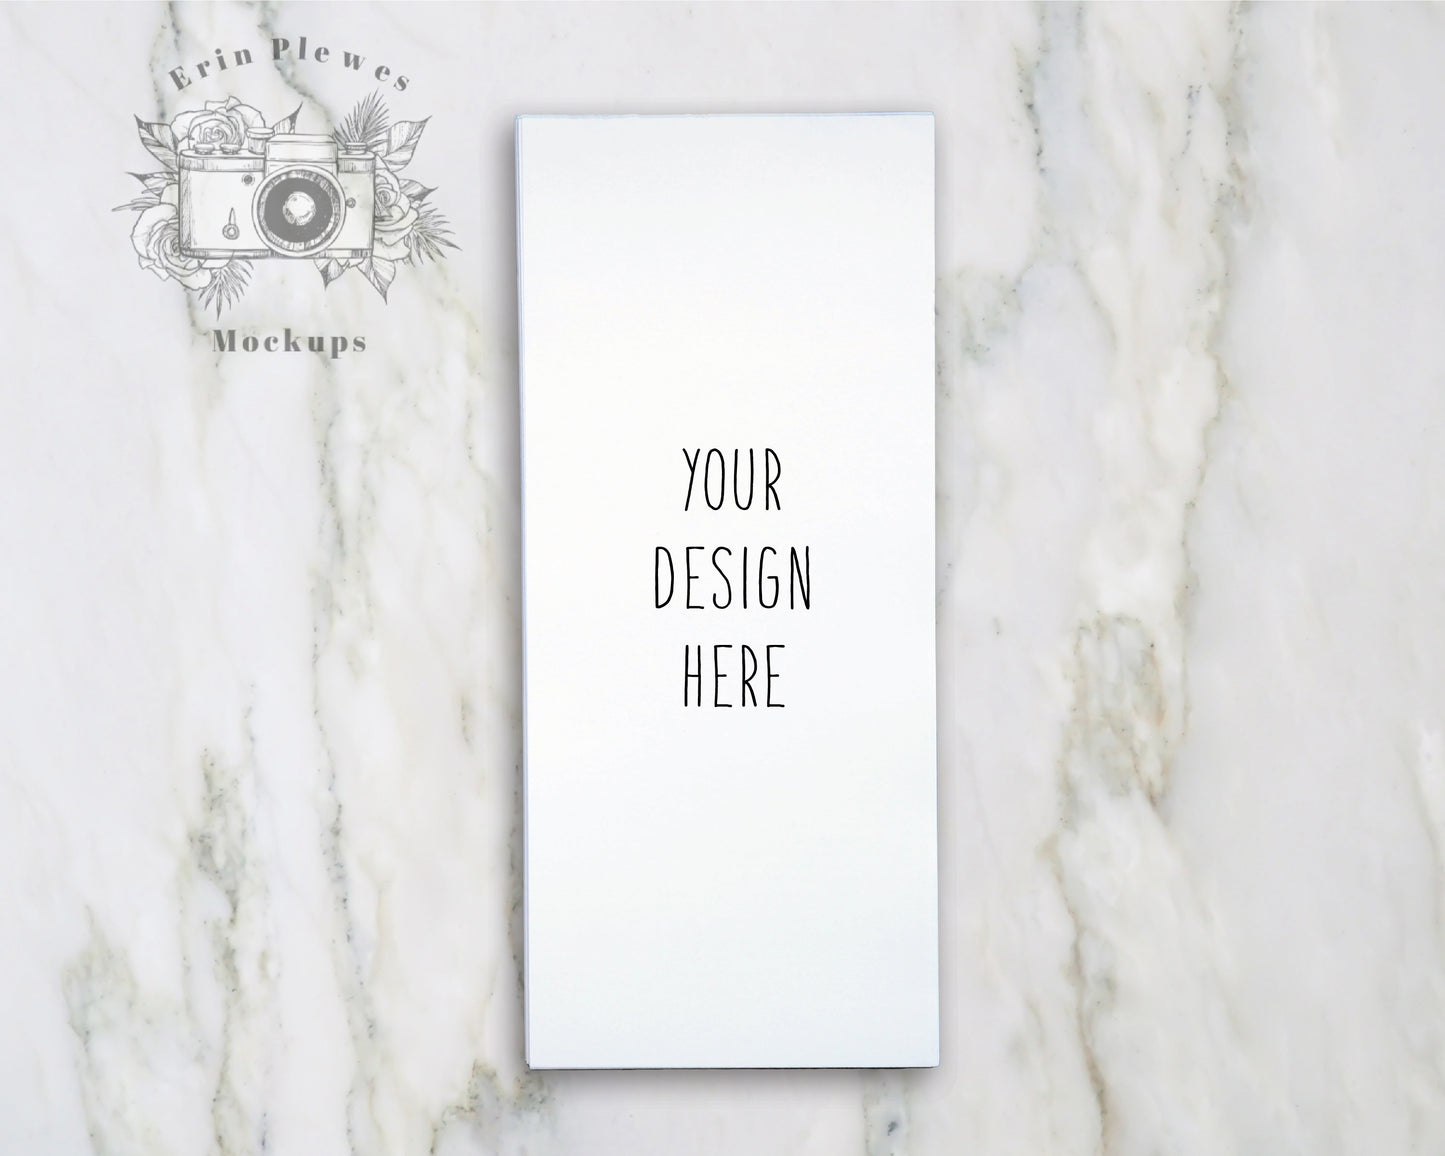 To Do List Mockup, Notepad Mock Up on Marble, Minimalist Stationary Flat Lay, Instant Digital Download Jpeg Template